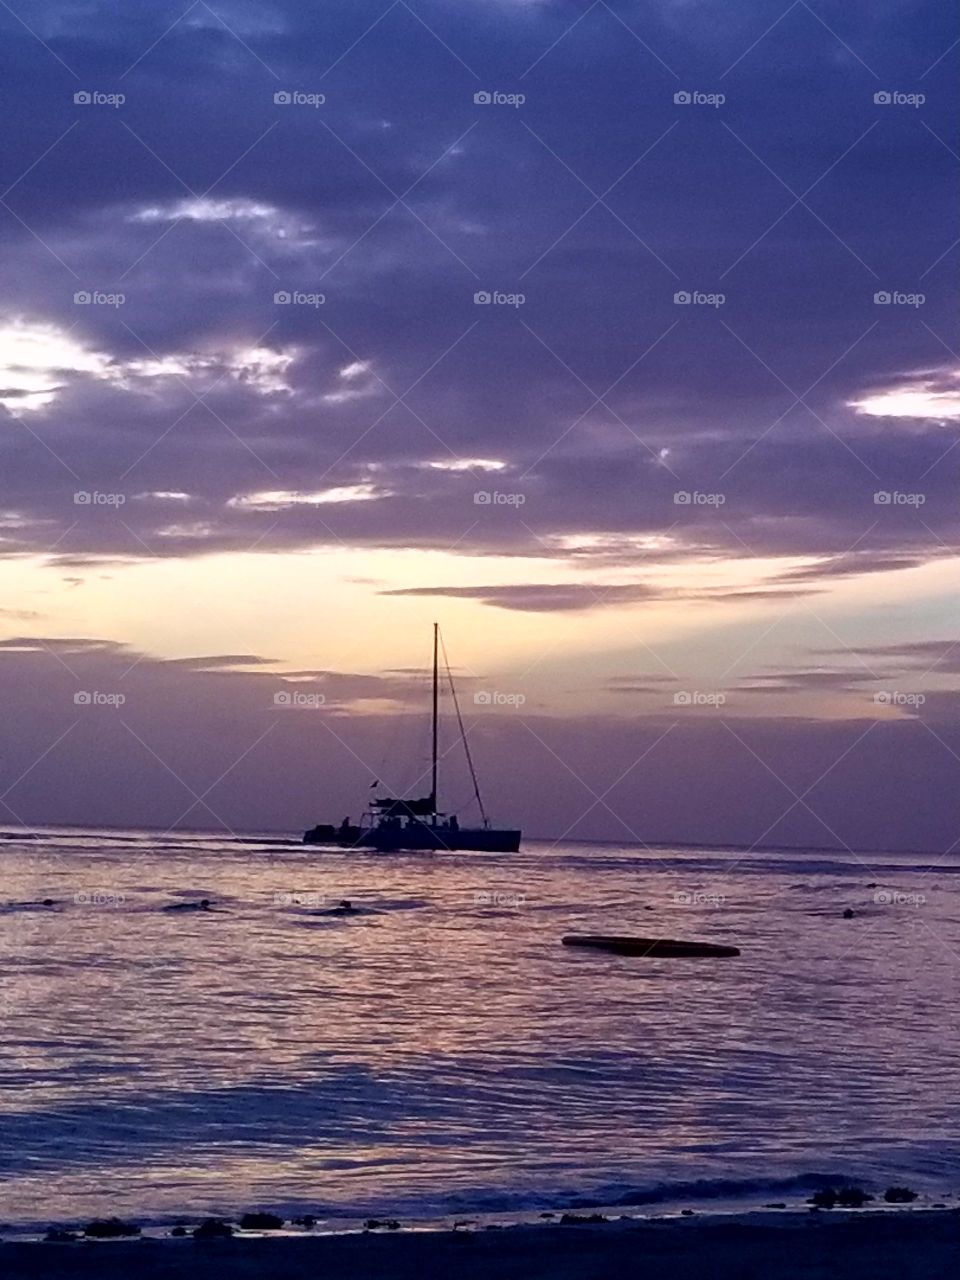 Sunset with Boat